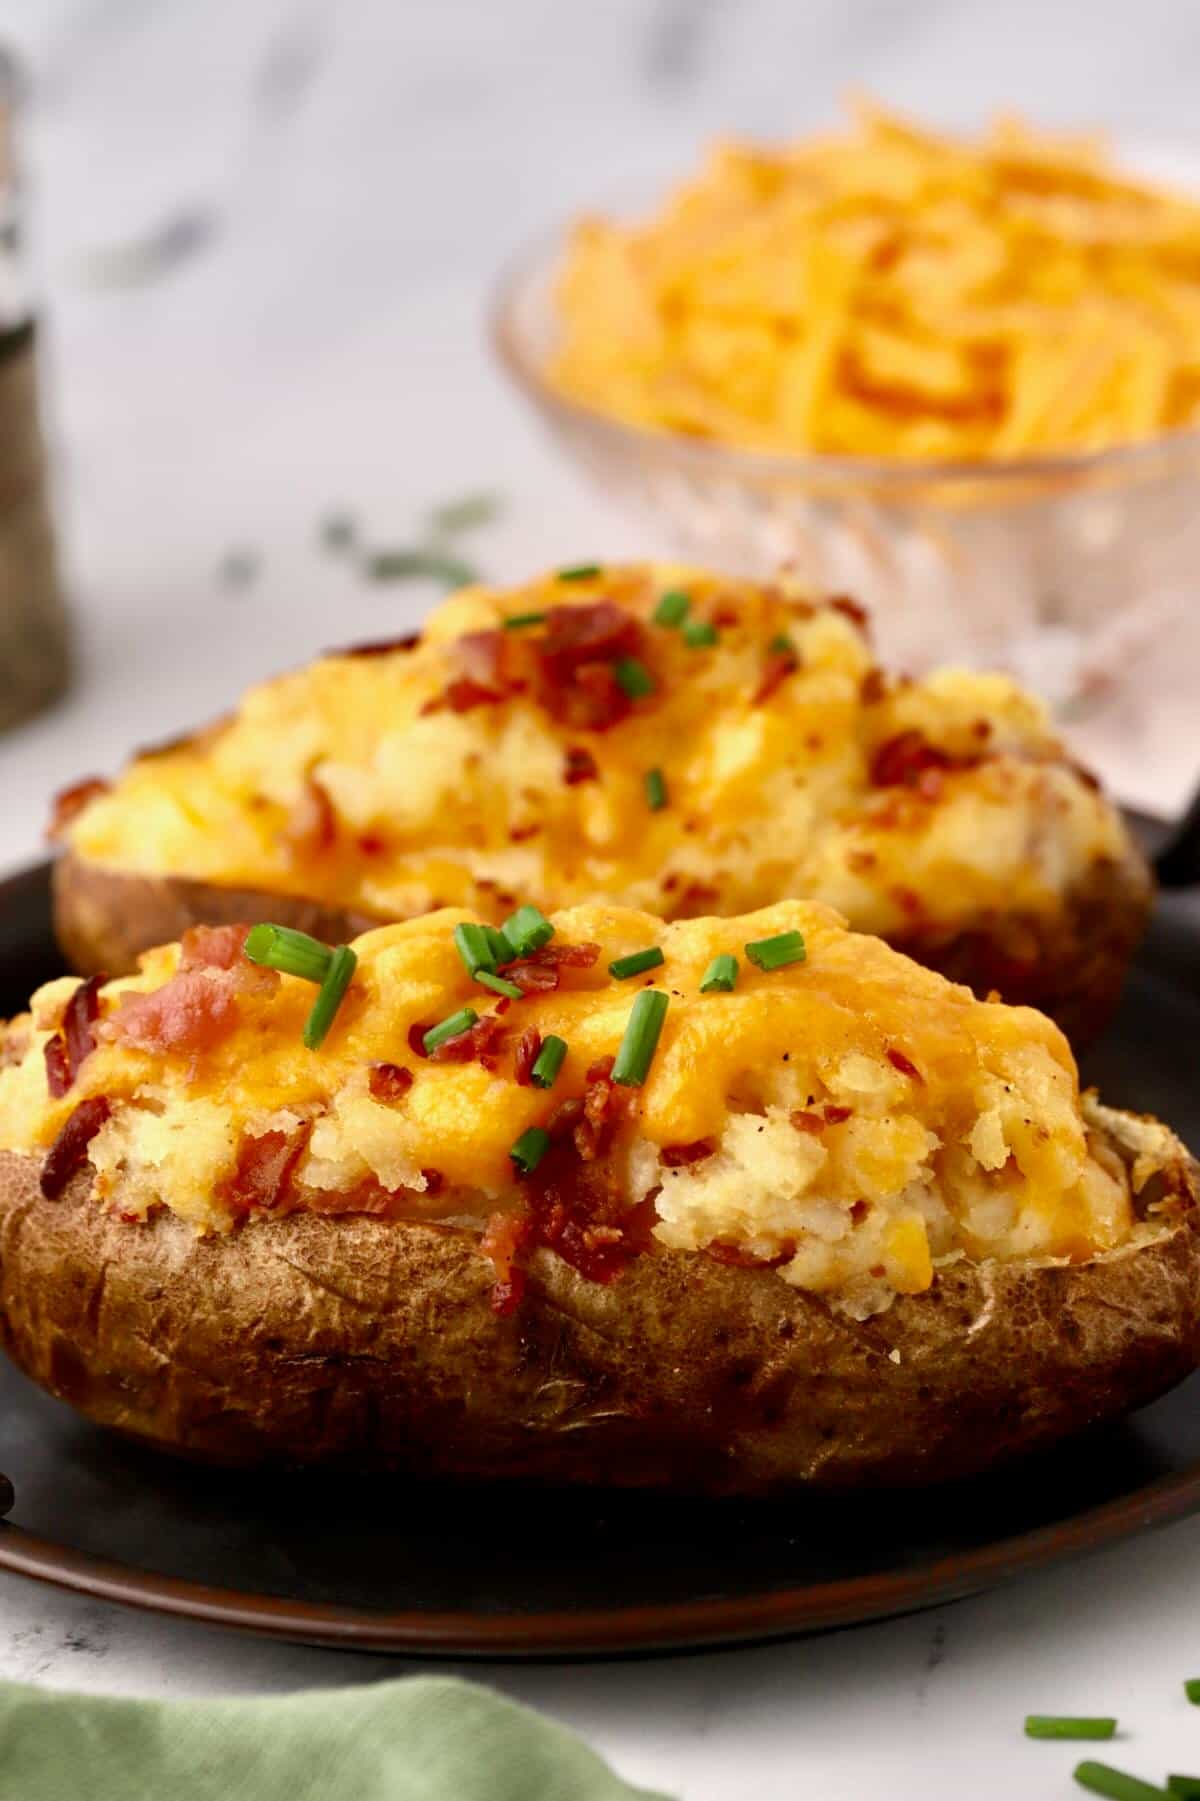 Two loaded twice baked potatoes on a plate.